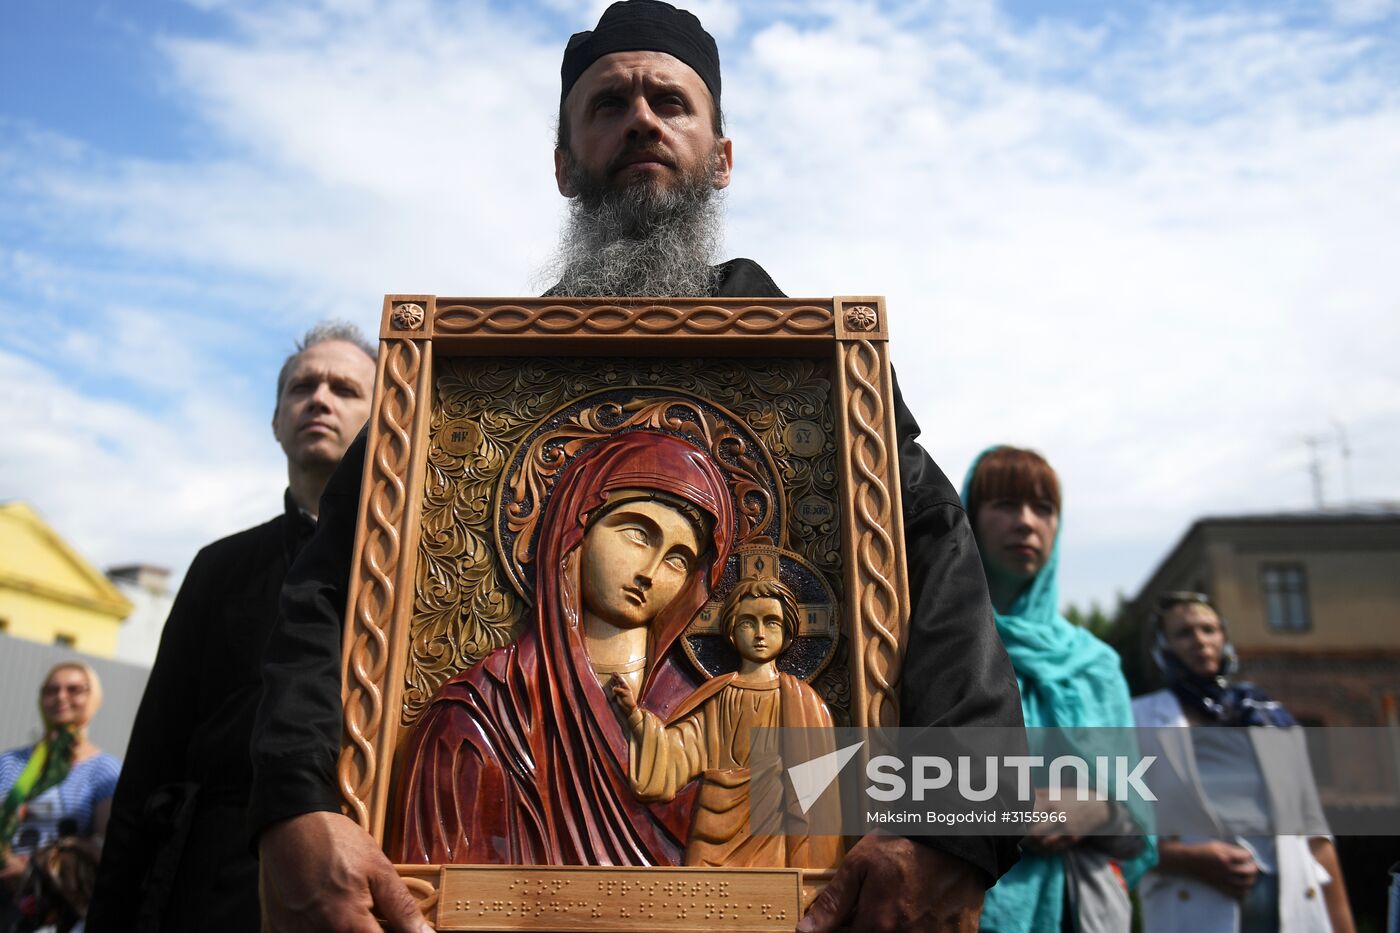 Apparition of Our Lady of Kazan Feast